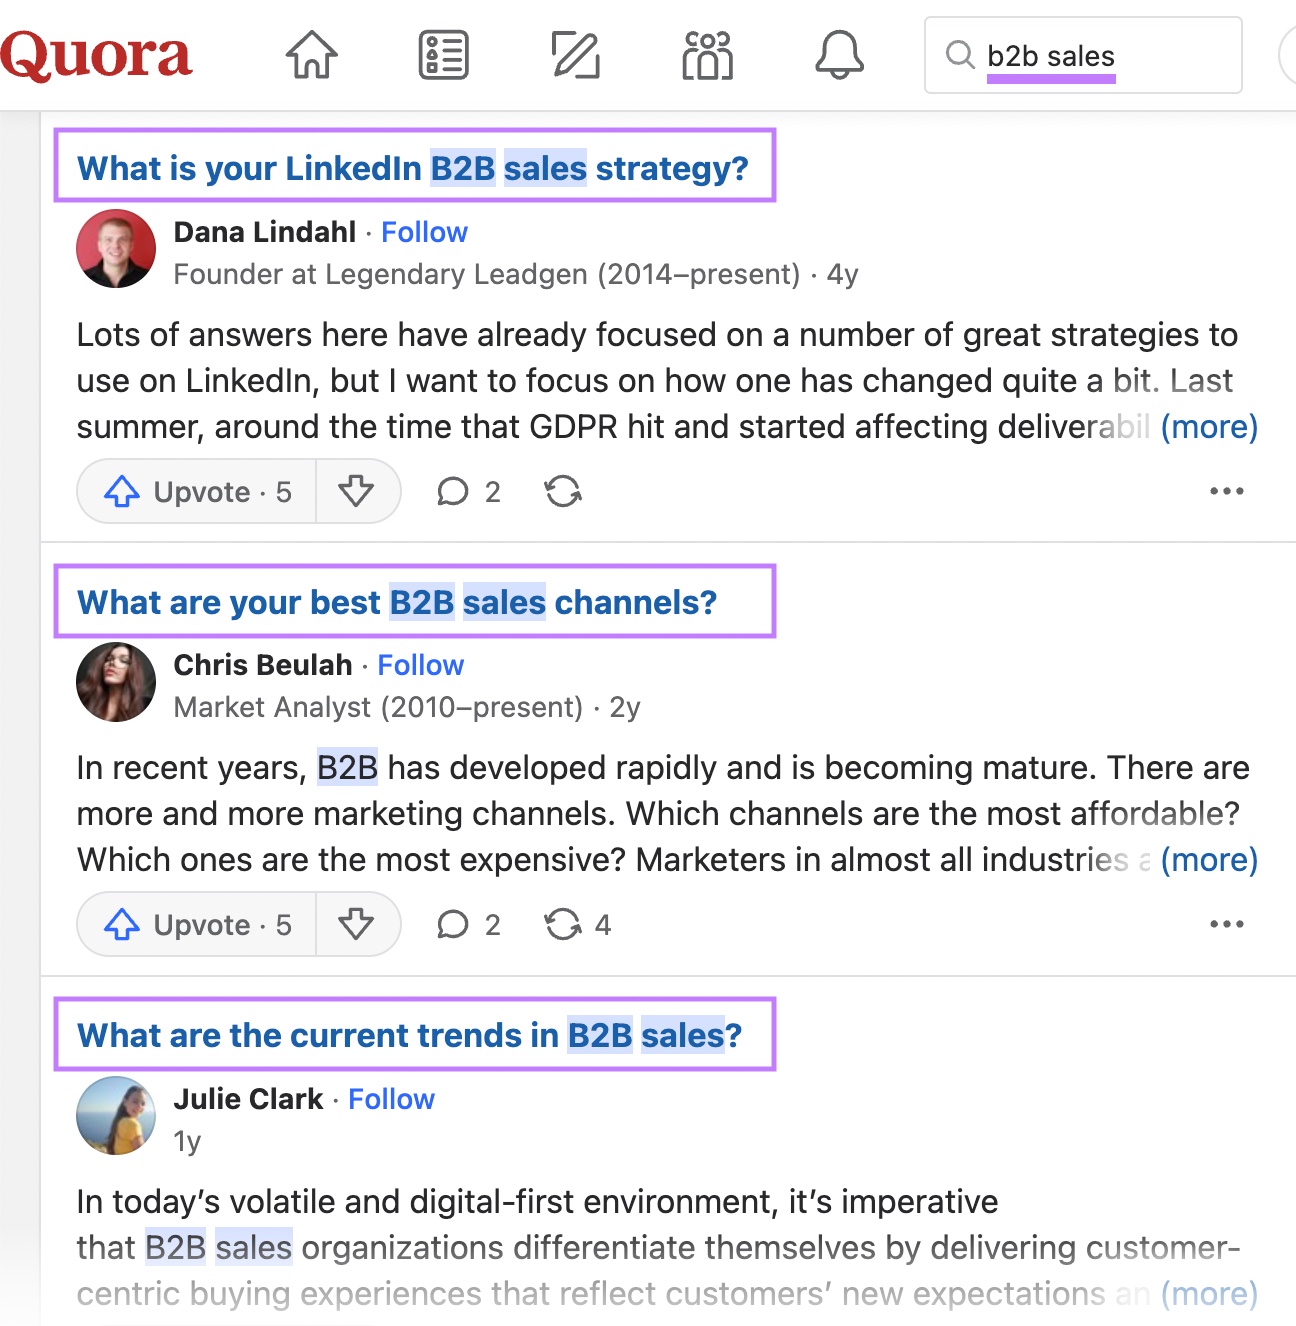 Questions on Quora related to B2B sales